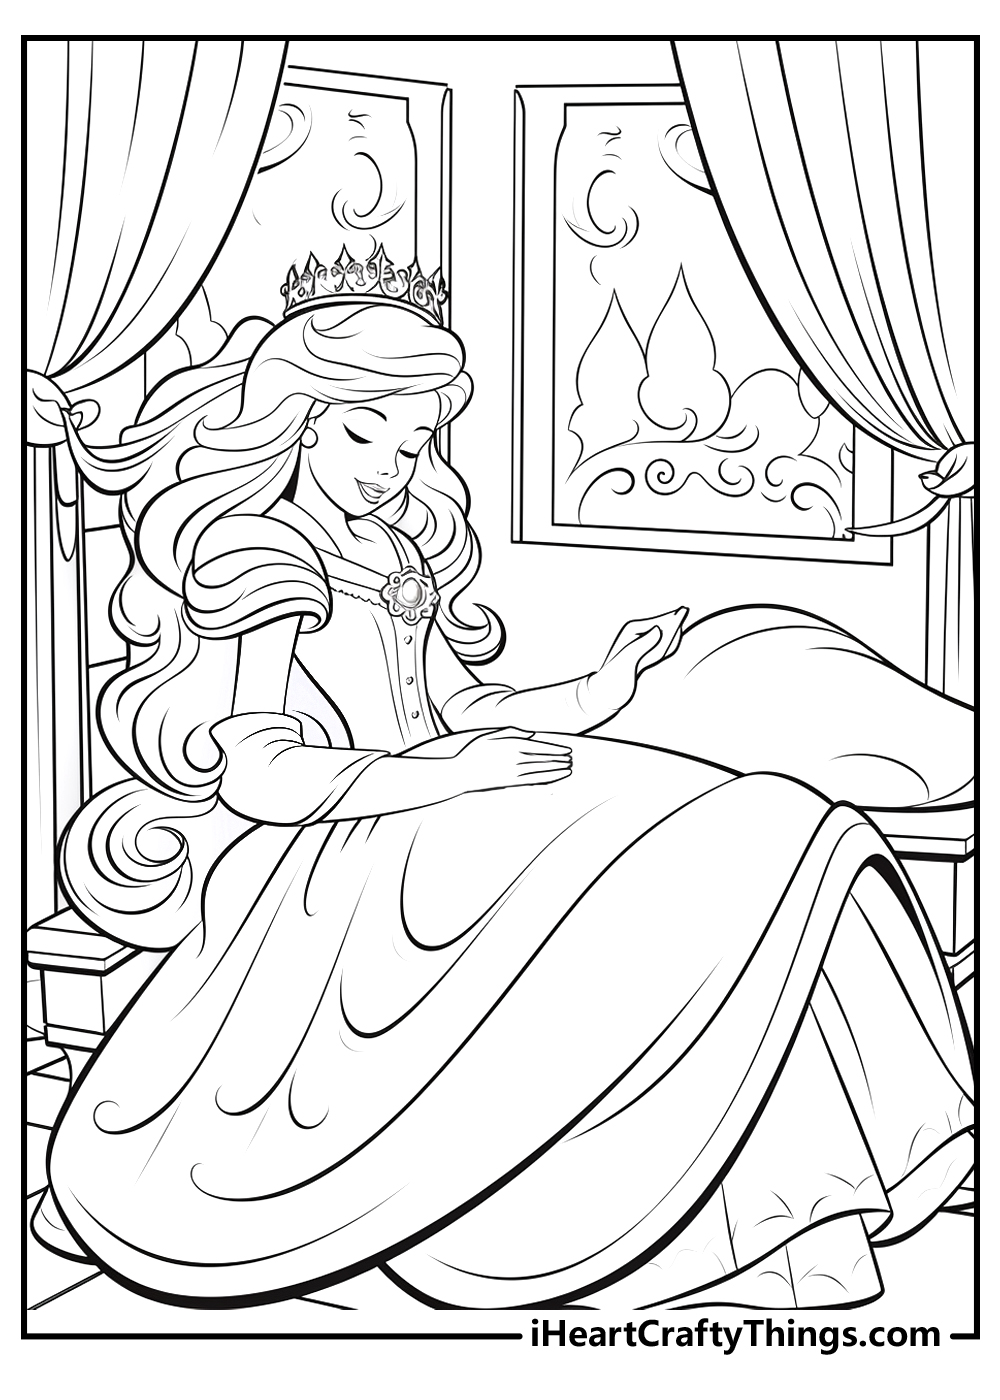 original sleeping beauty coloring pages for kids